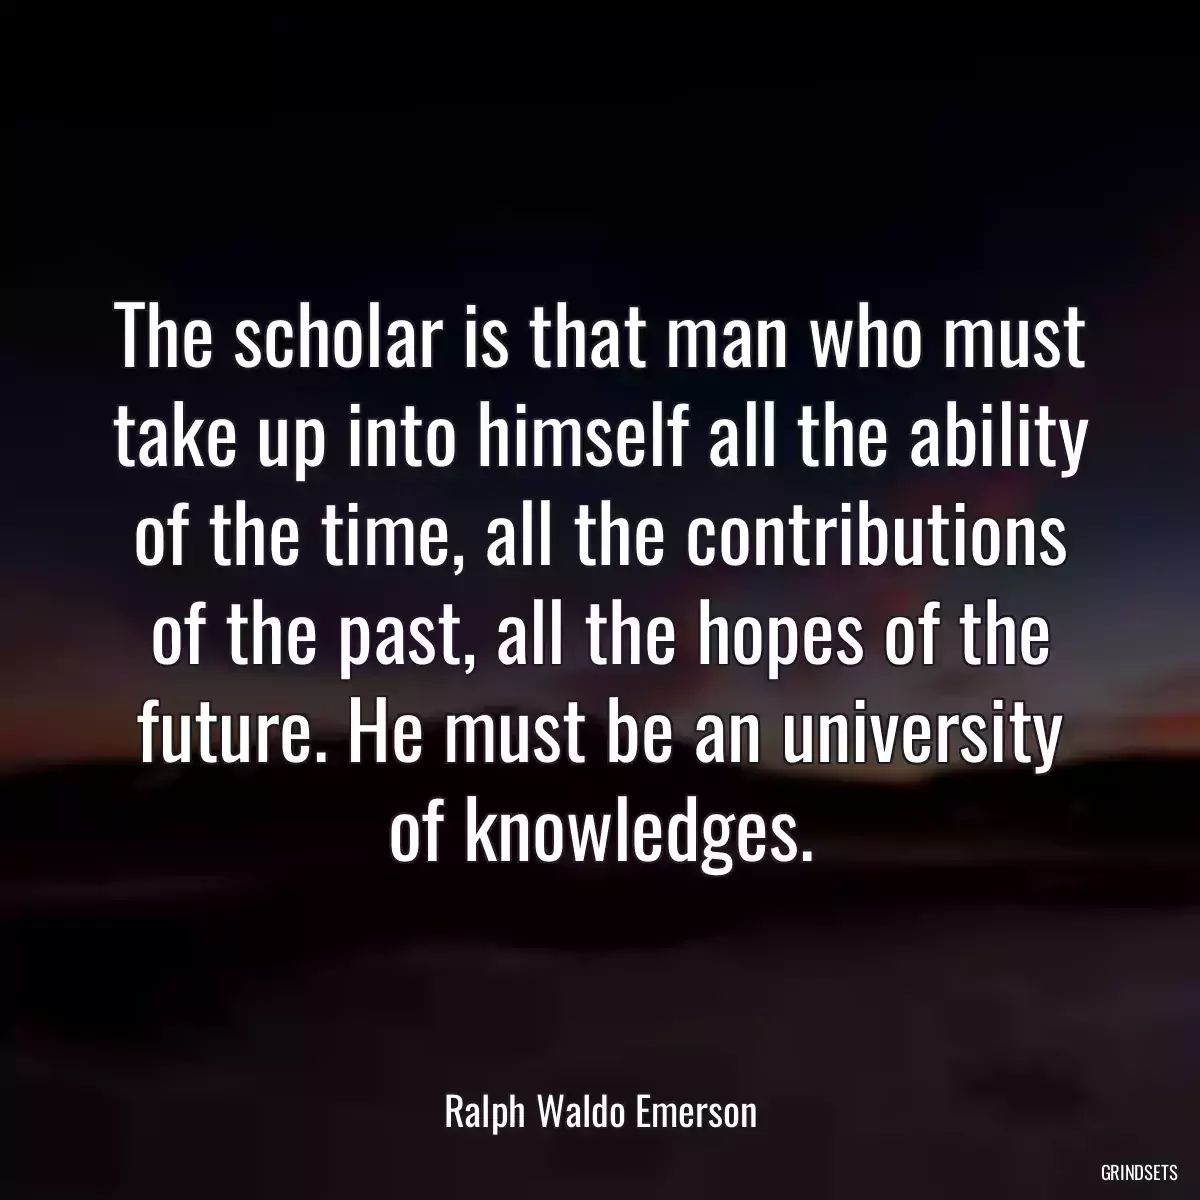 The scholar is that man who must take up into himself all the ability of the time, all the contributions of the past, all the hopes of the future. He must be an university of knowledges.